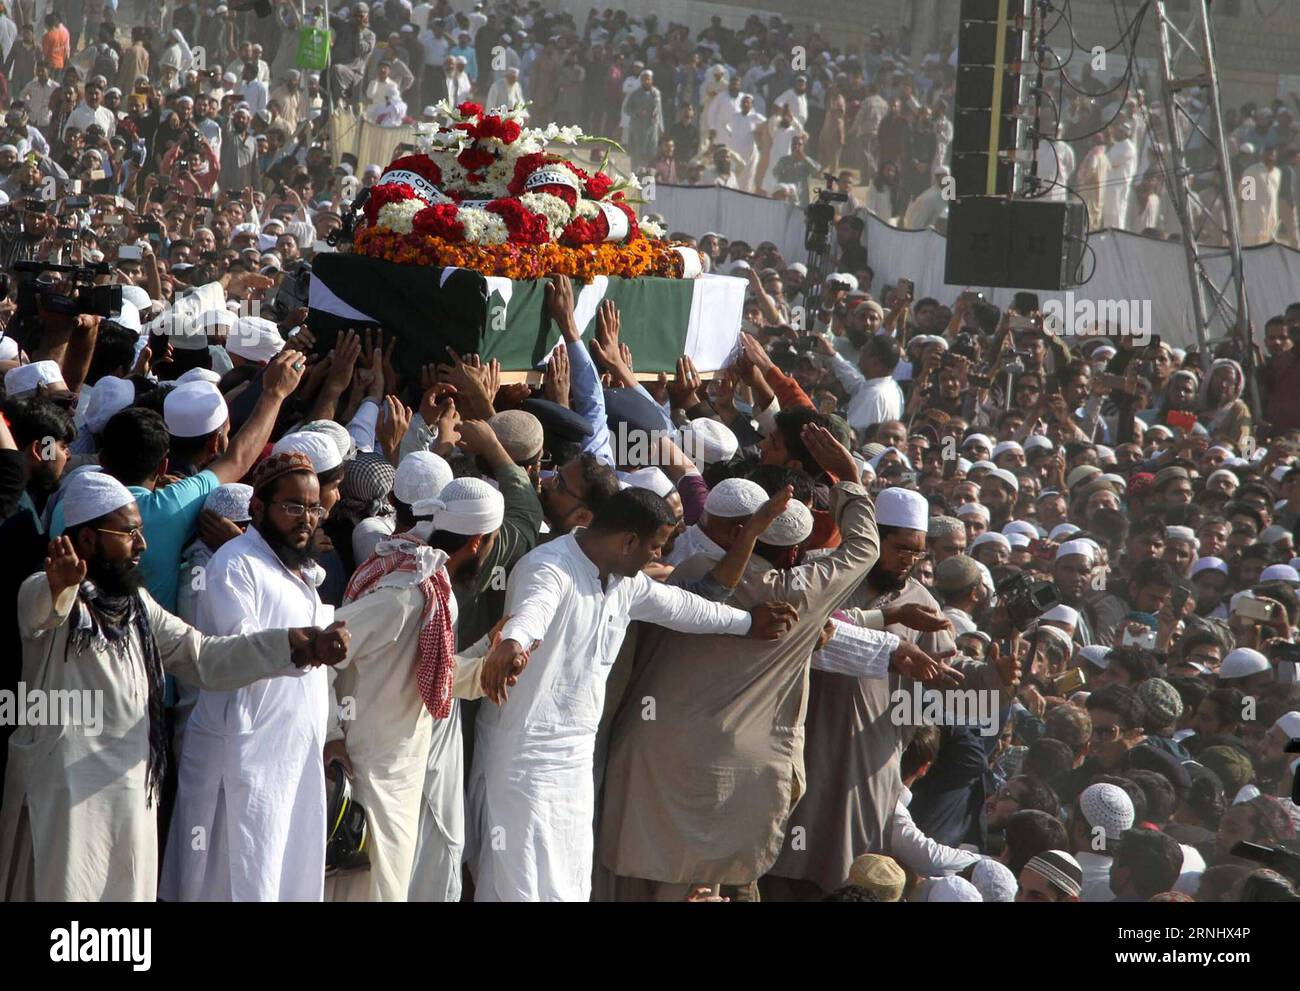 Pakistan: Junaid Jamshed Beerdigung in Karachi (161215) -- KARACHI (PAKISTAN), Dec. 15, 2016 -- People attend the funeral of Junaid Jamshed, a Pakistani pop singer turned Islamic preacher, in Karachi, southern Pakistan, on Dec. 15, 2016. Thousands of people attended the funeral prayers for Jashmed, who died in the Dec. 7 plane crash in Havelian. A passenger plane of Pakistan International Airlines with 48 people on board crashed in Pakistan s northwest Havelian area on Wednesday. No one survived the accident. ) PAKISTAN-KARACHI-PLANE CRASH-FUNERAL Masroor PUBLICATIONxNOTxINxCHN   Pakistan Juna Stock Photo